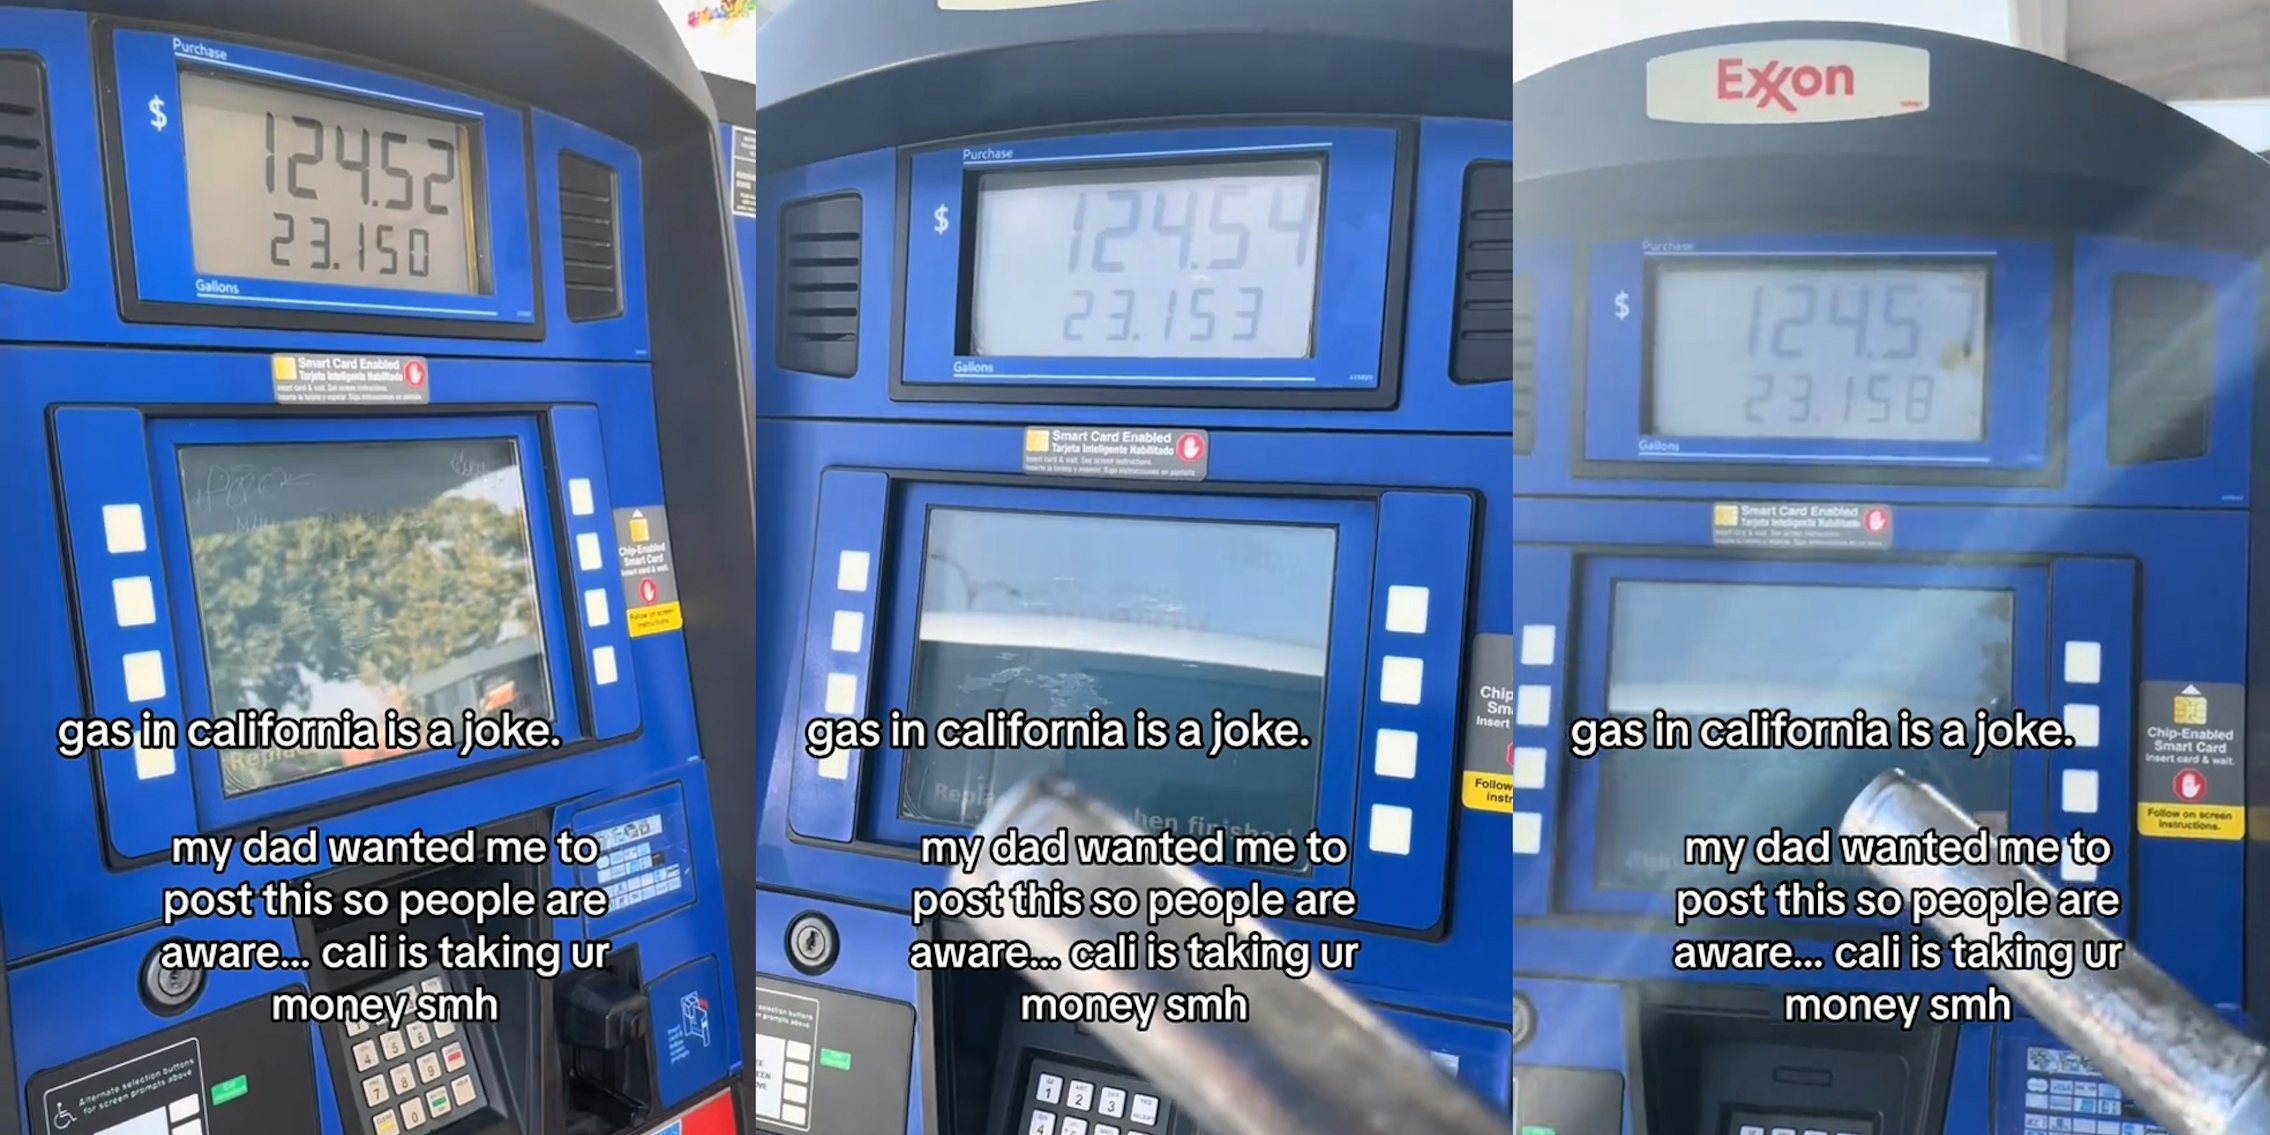 Exon gas pump with caption 'gas in California is a joke. my dad wanted me to post this so people are aware...cali is taking ur money smh' (l) Exon gas pump with caption 'gas in California is a joke. my dad wanted me to post this so people are aware...cali is taking ur money smh' (c) Exon gas pump with caption 'gas in California is a joke. my dad wanted me to post this so people are aware...cali is taking ur money smh' (r)